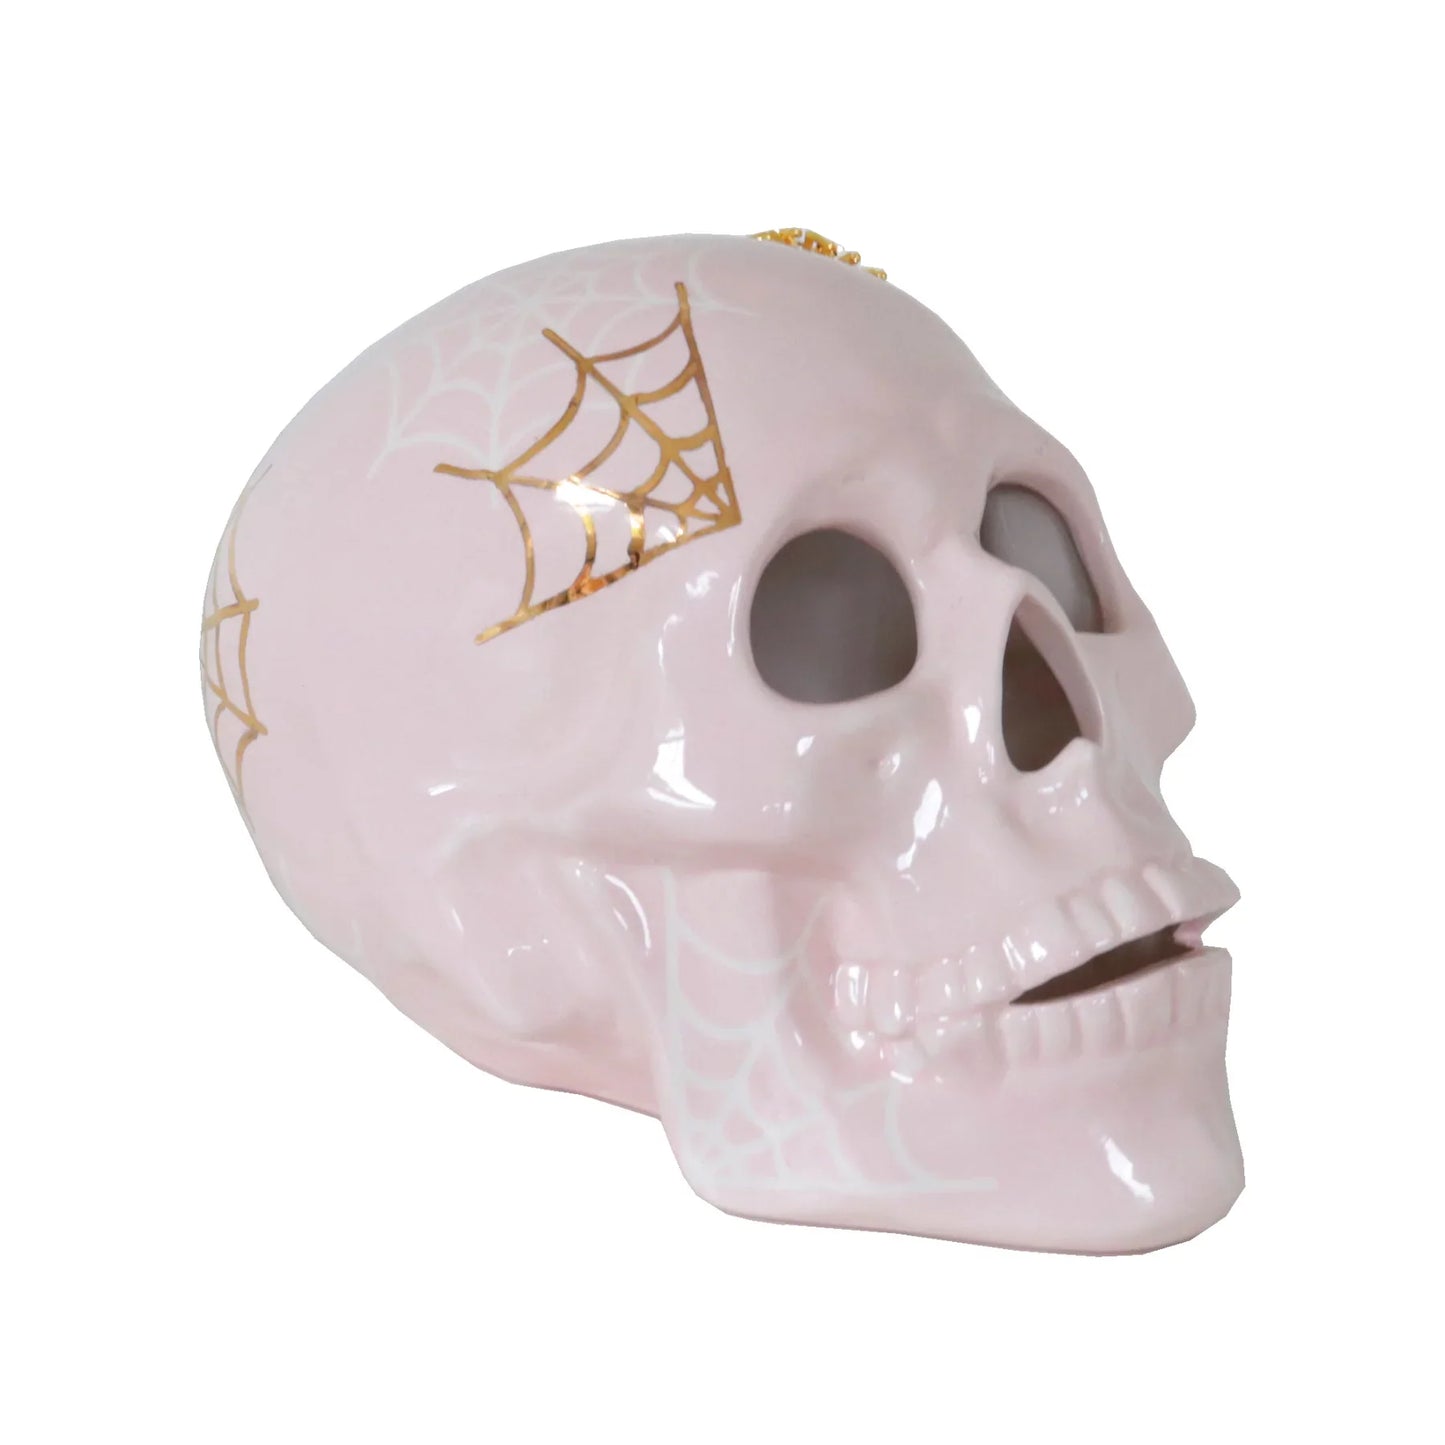 "Mr. Bones and Charlotte" Skull Decor with 22K Gold Accents- Pink | Wholesale